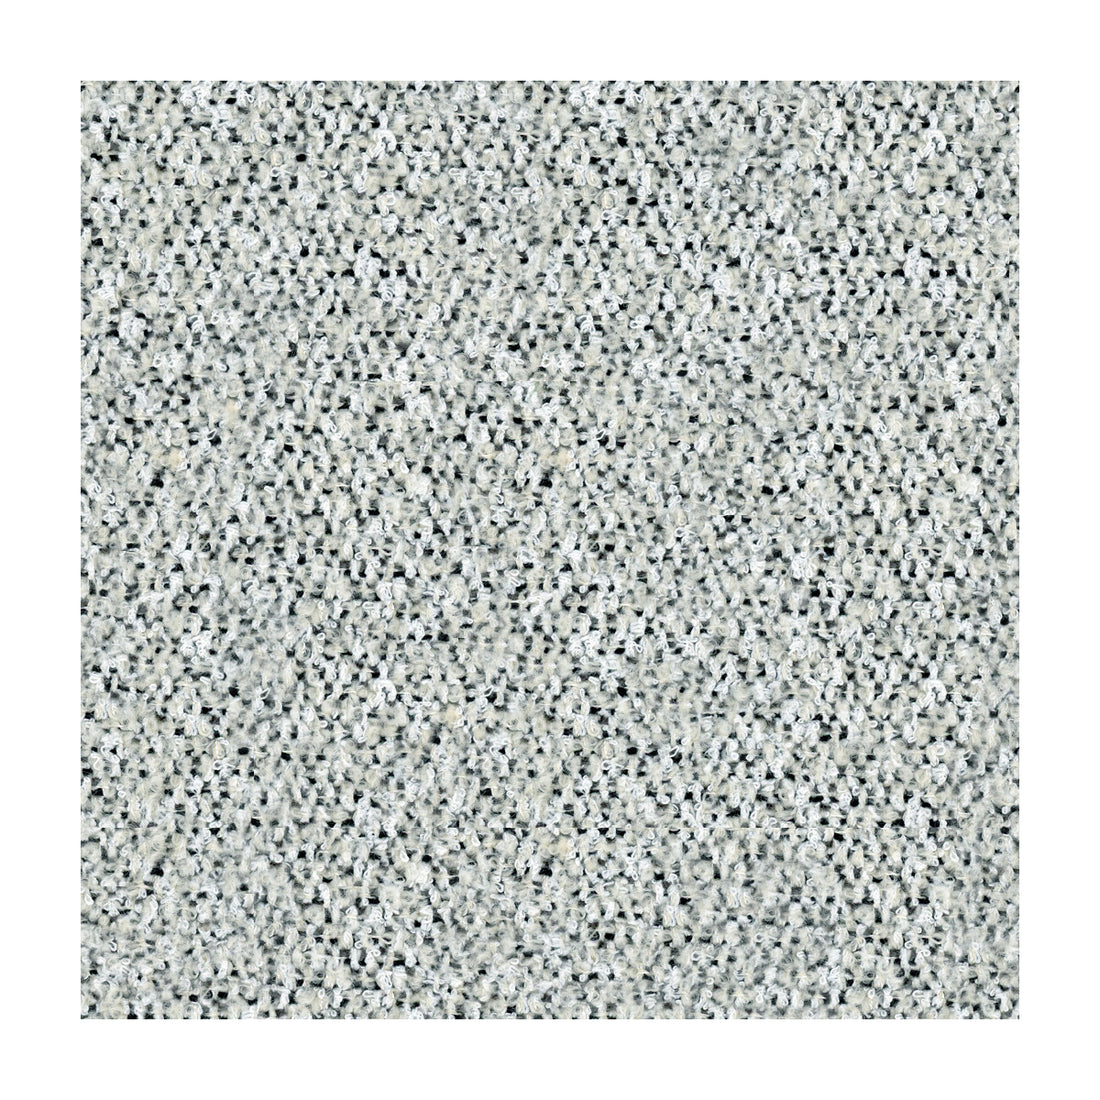 Tessellate fabric in ivory/black color - pattern GWF-3527.18.0 - by Lee Jofa Modern in the Kelly Wearstler III collection